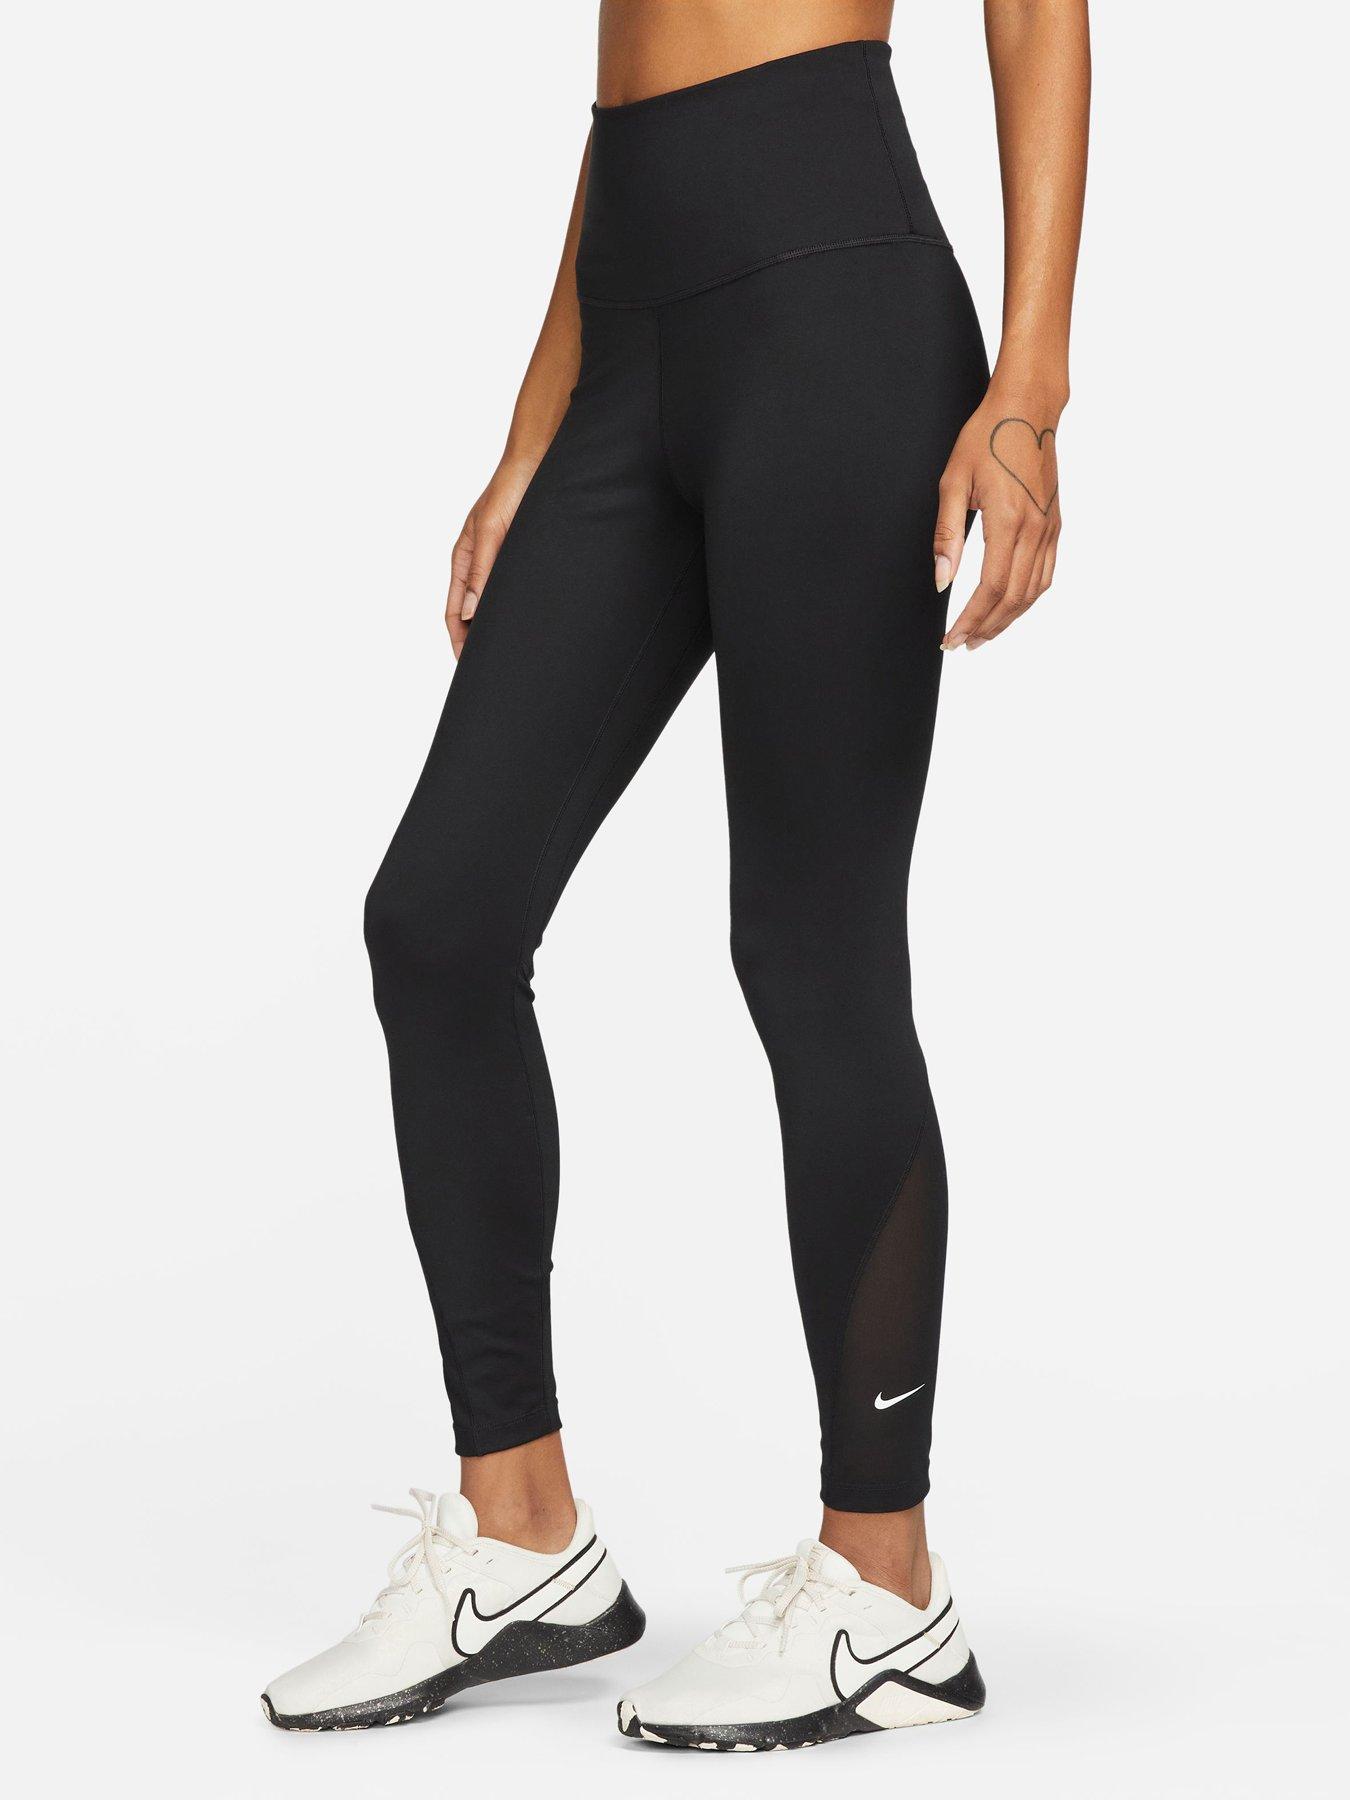 Nike Essential 7/8 Running Pants Women's Size S Black - for sale online